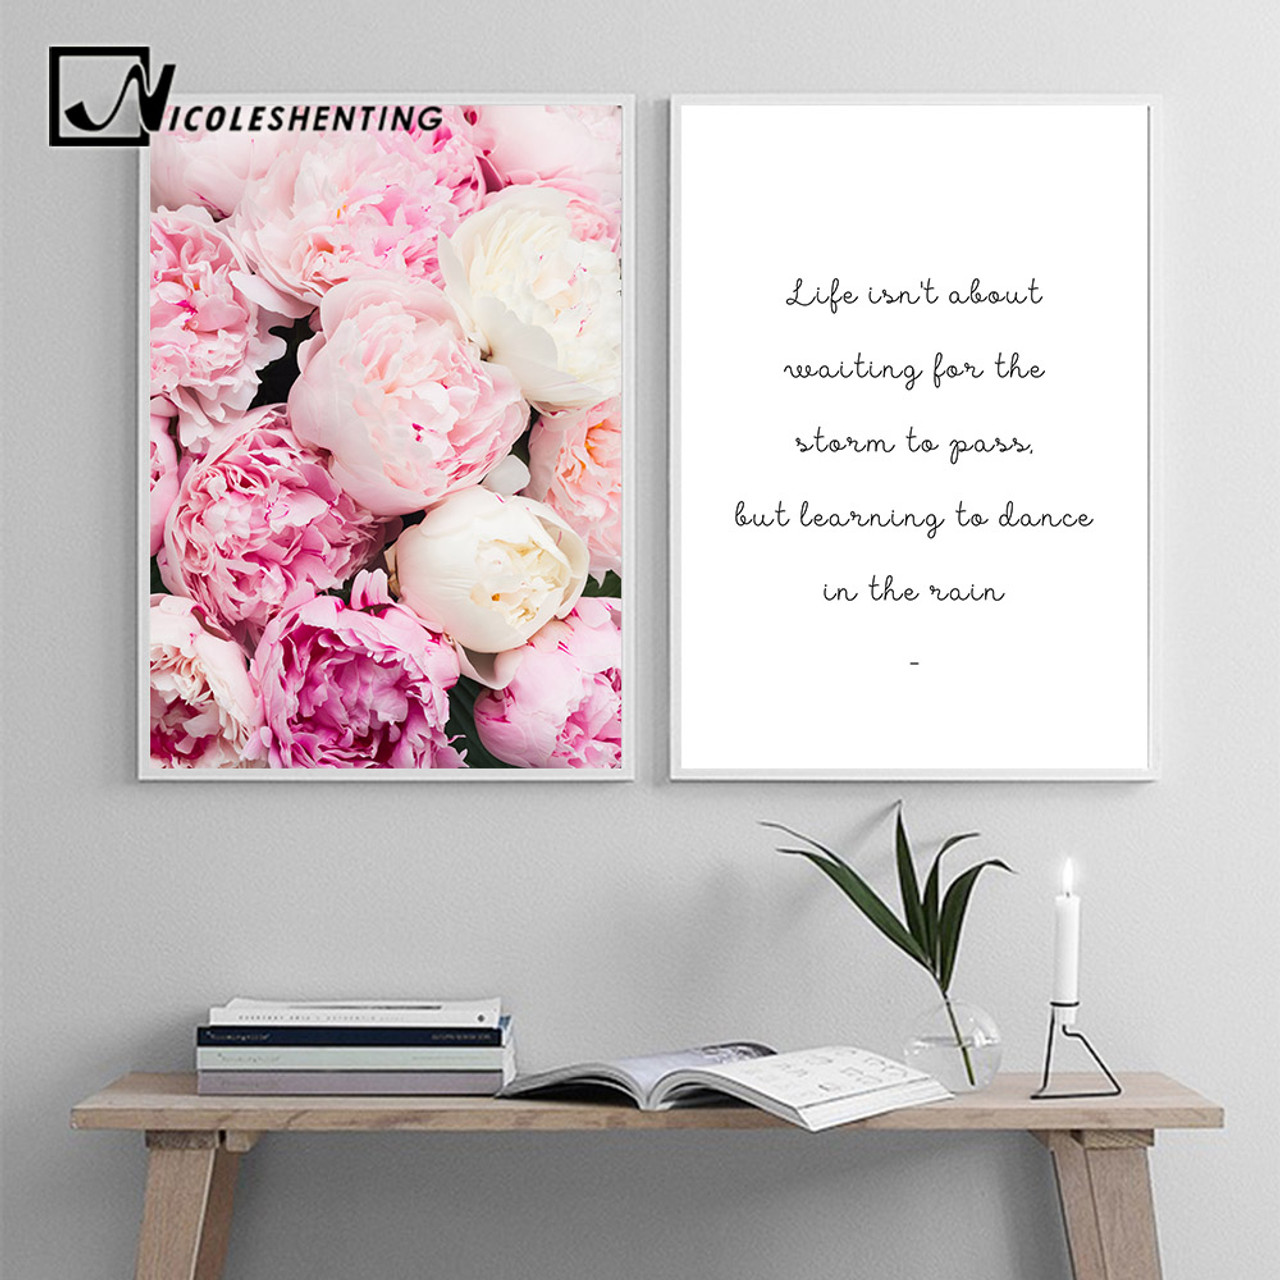 Scandinavian Flower Canvas Art Nordic Wall Painting Prints Pink Floral Poster Life Quotes Decoration Picture Modern Home Decor Onshopdeals Com